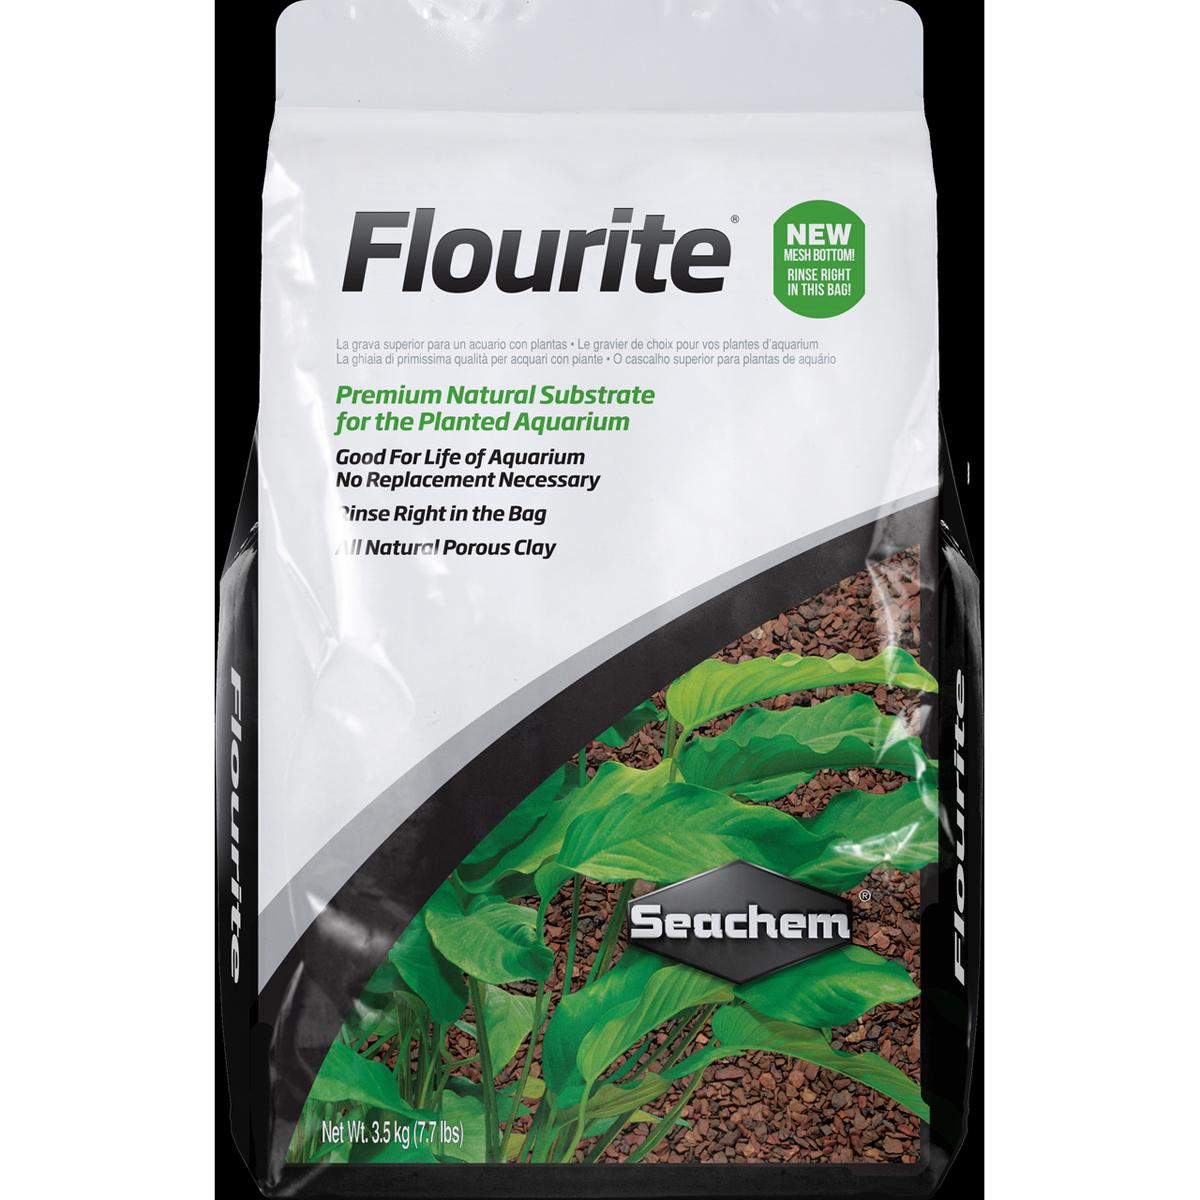 15lbs of Flourite Black Sand for $21.32